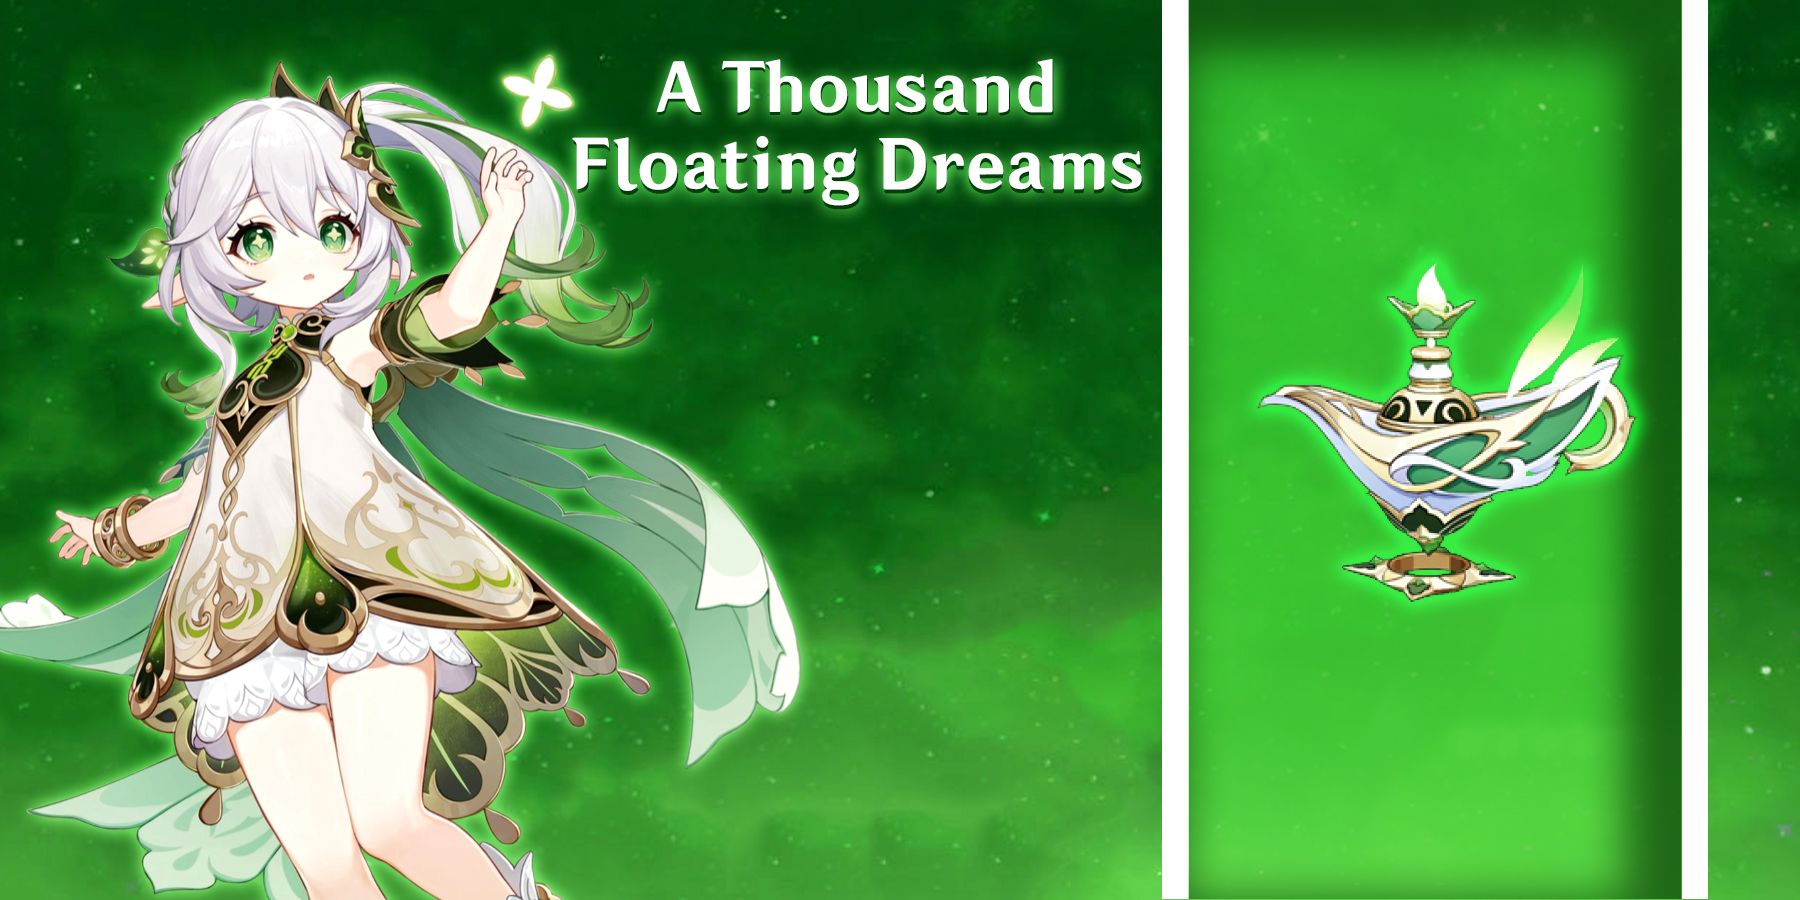 nahida and a thousand floating dreams in genshin impact